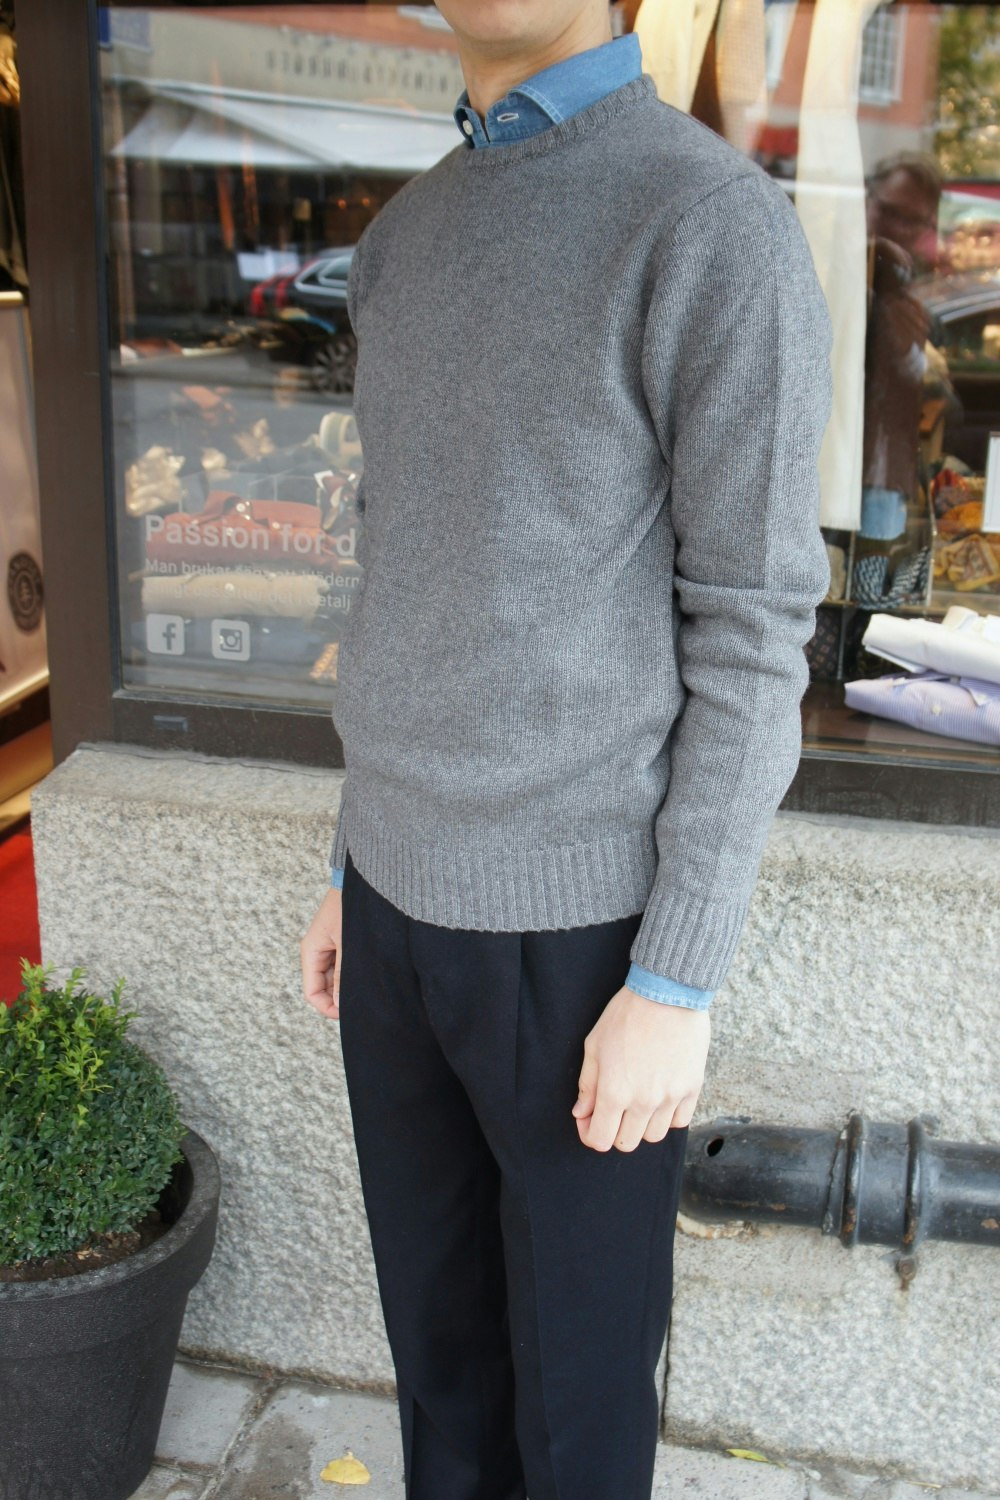 Chunky Cashmere/Wool Crewneck Pullover - Grey